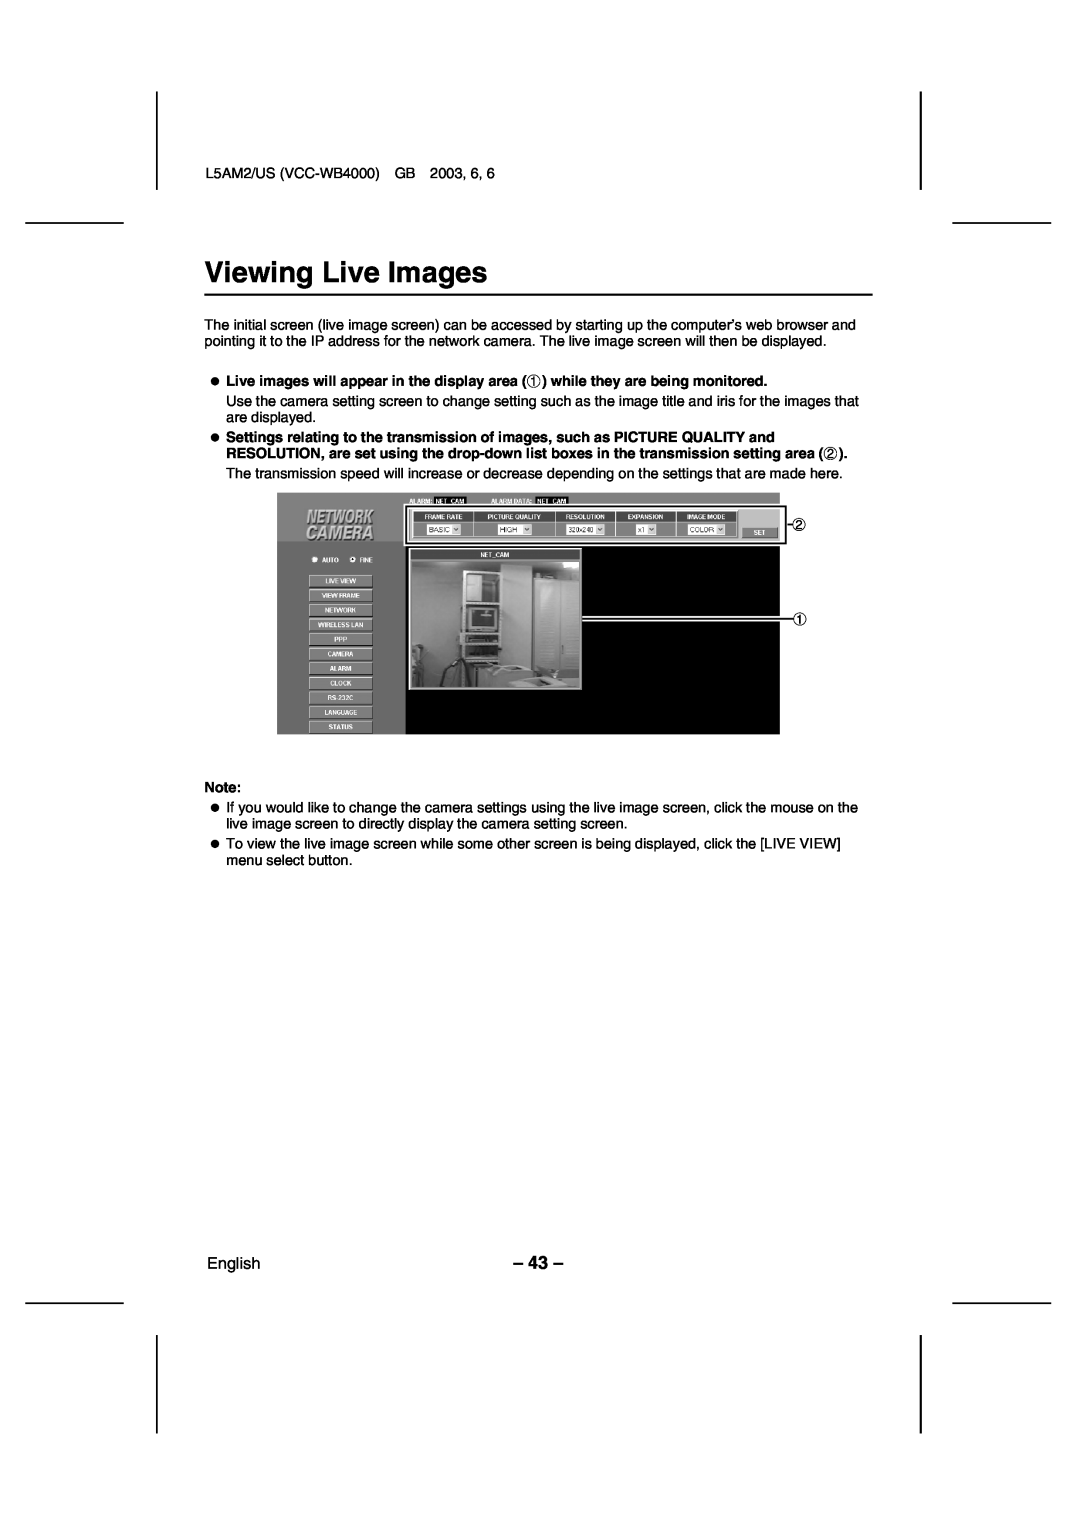 Sanyo VCC-WB4000 instruction manual Viewing Live Images, English 